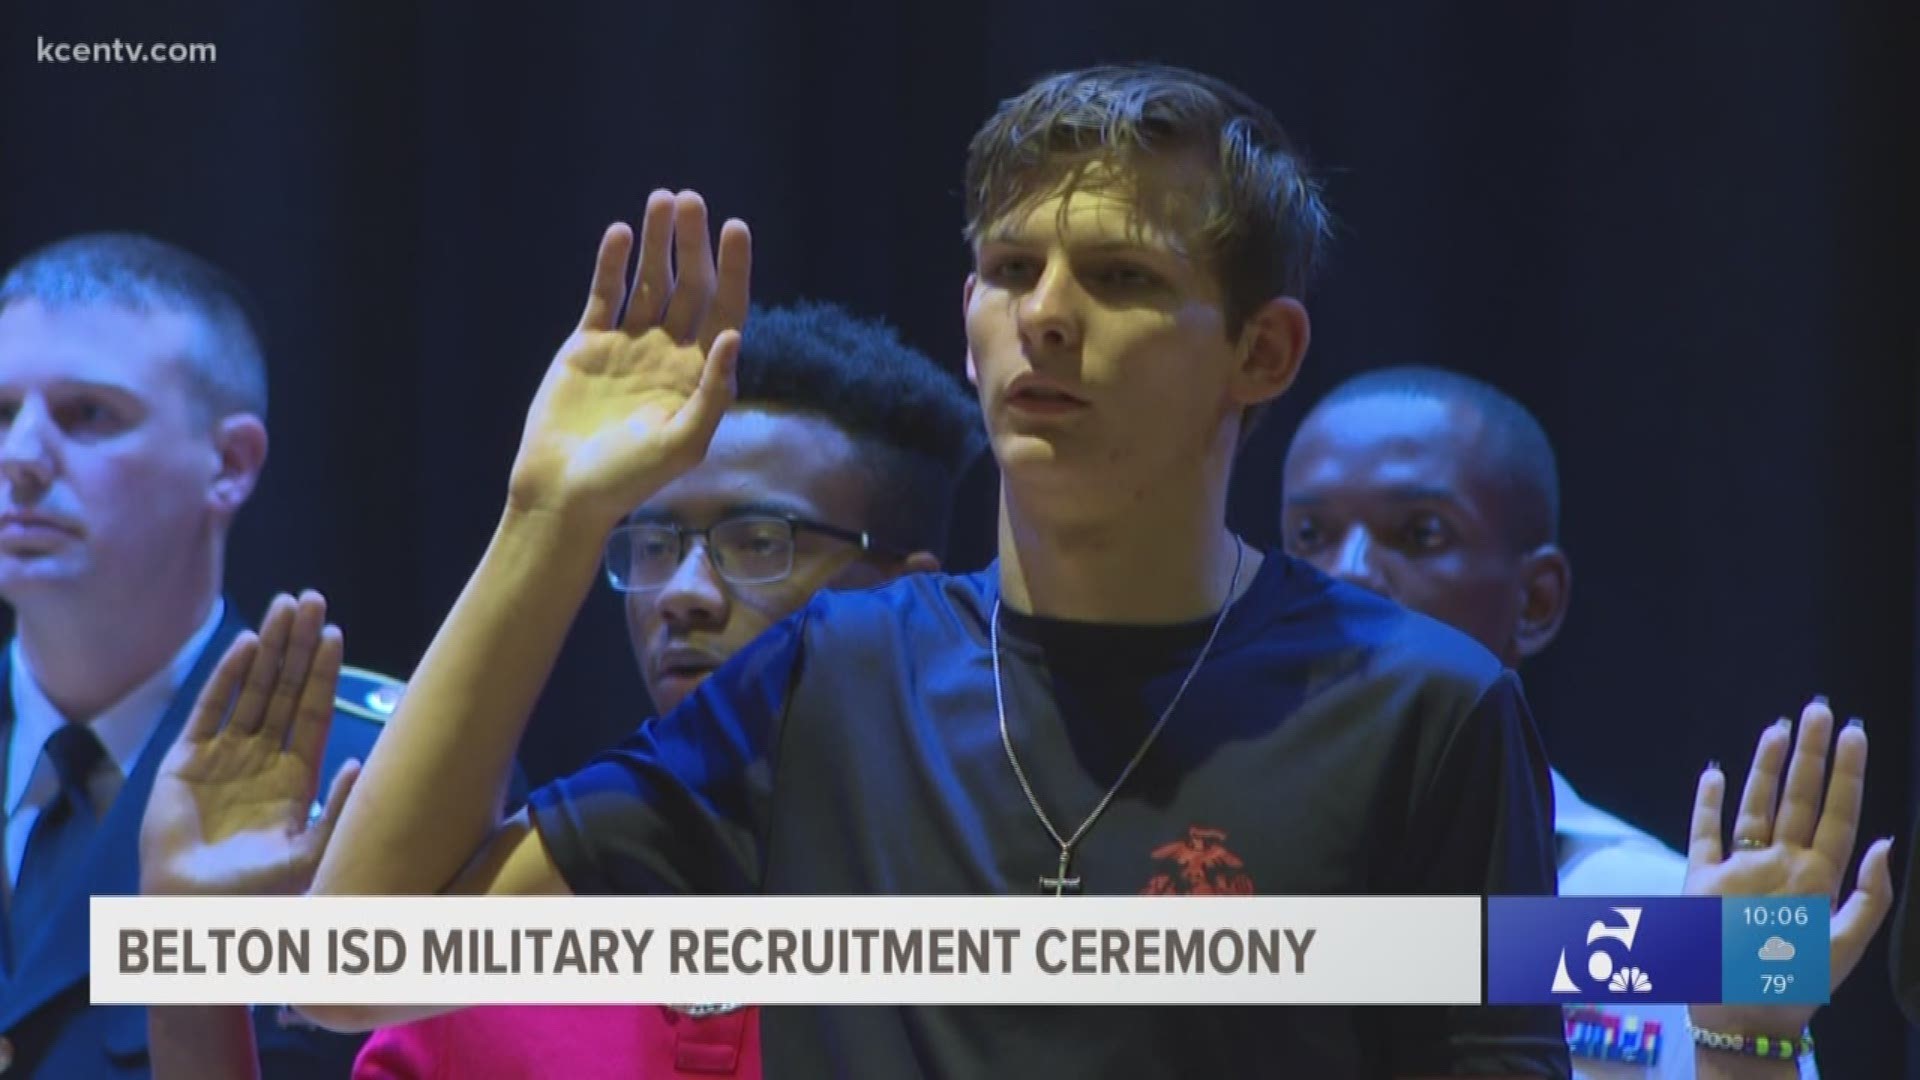 Belton ISD recognizes students joining the military after graduation | www.semashow.com